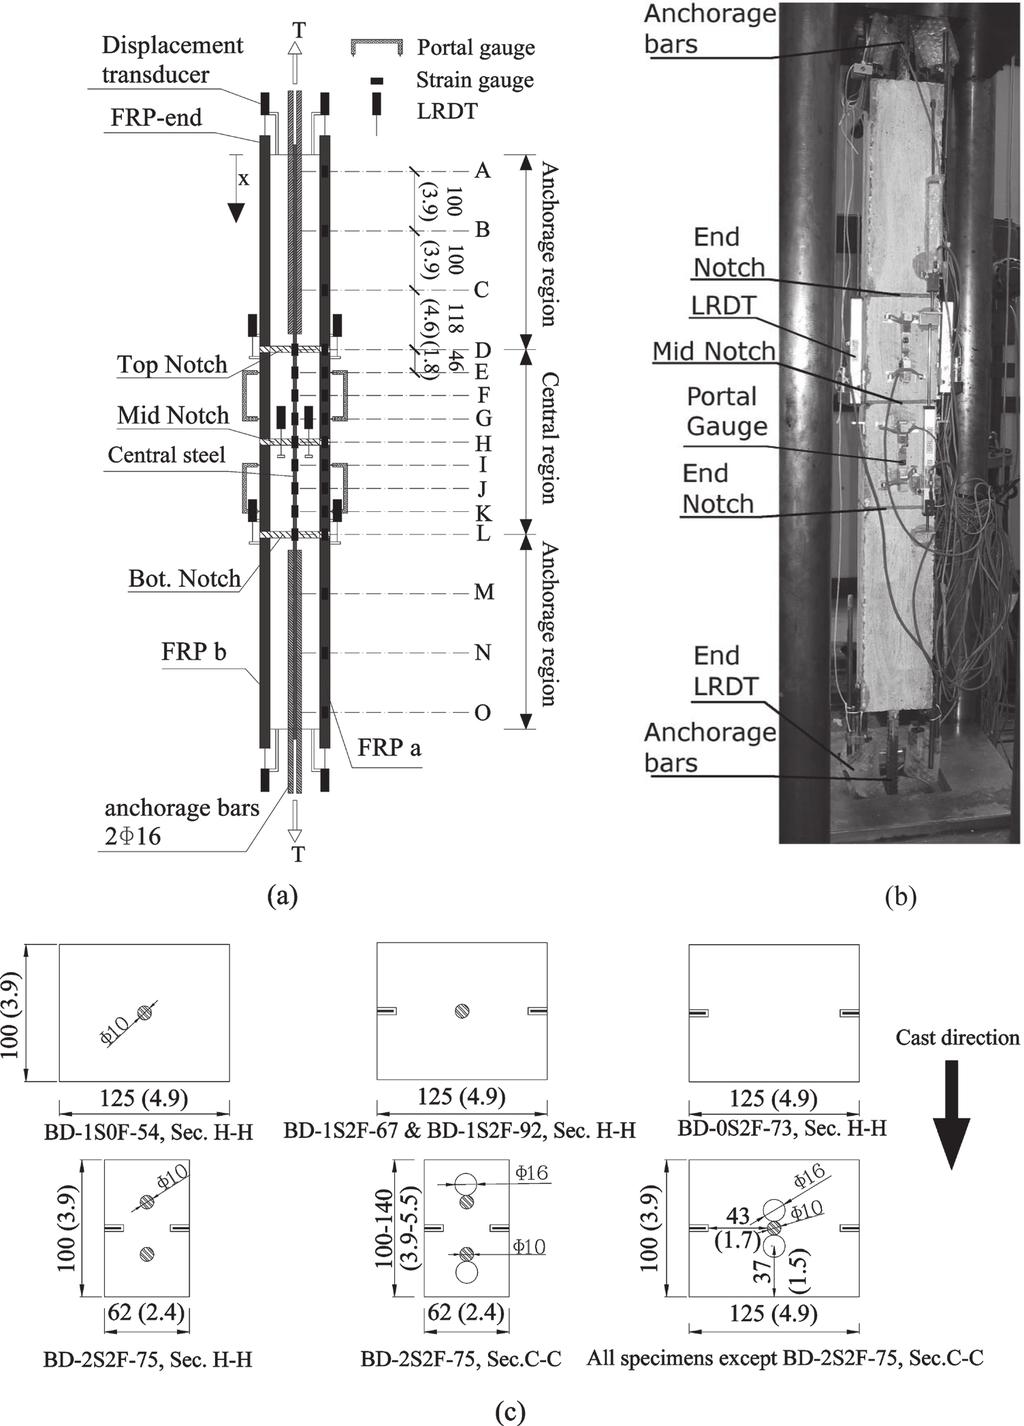 Fig. 4 Bond test series: (a) side view; (b) Specimen Bd-1S2F-92 in test rig; and (c) cross sections. (Note: Dimensions in mm [in.].